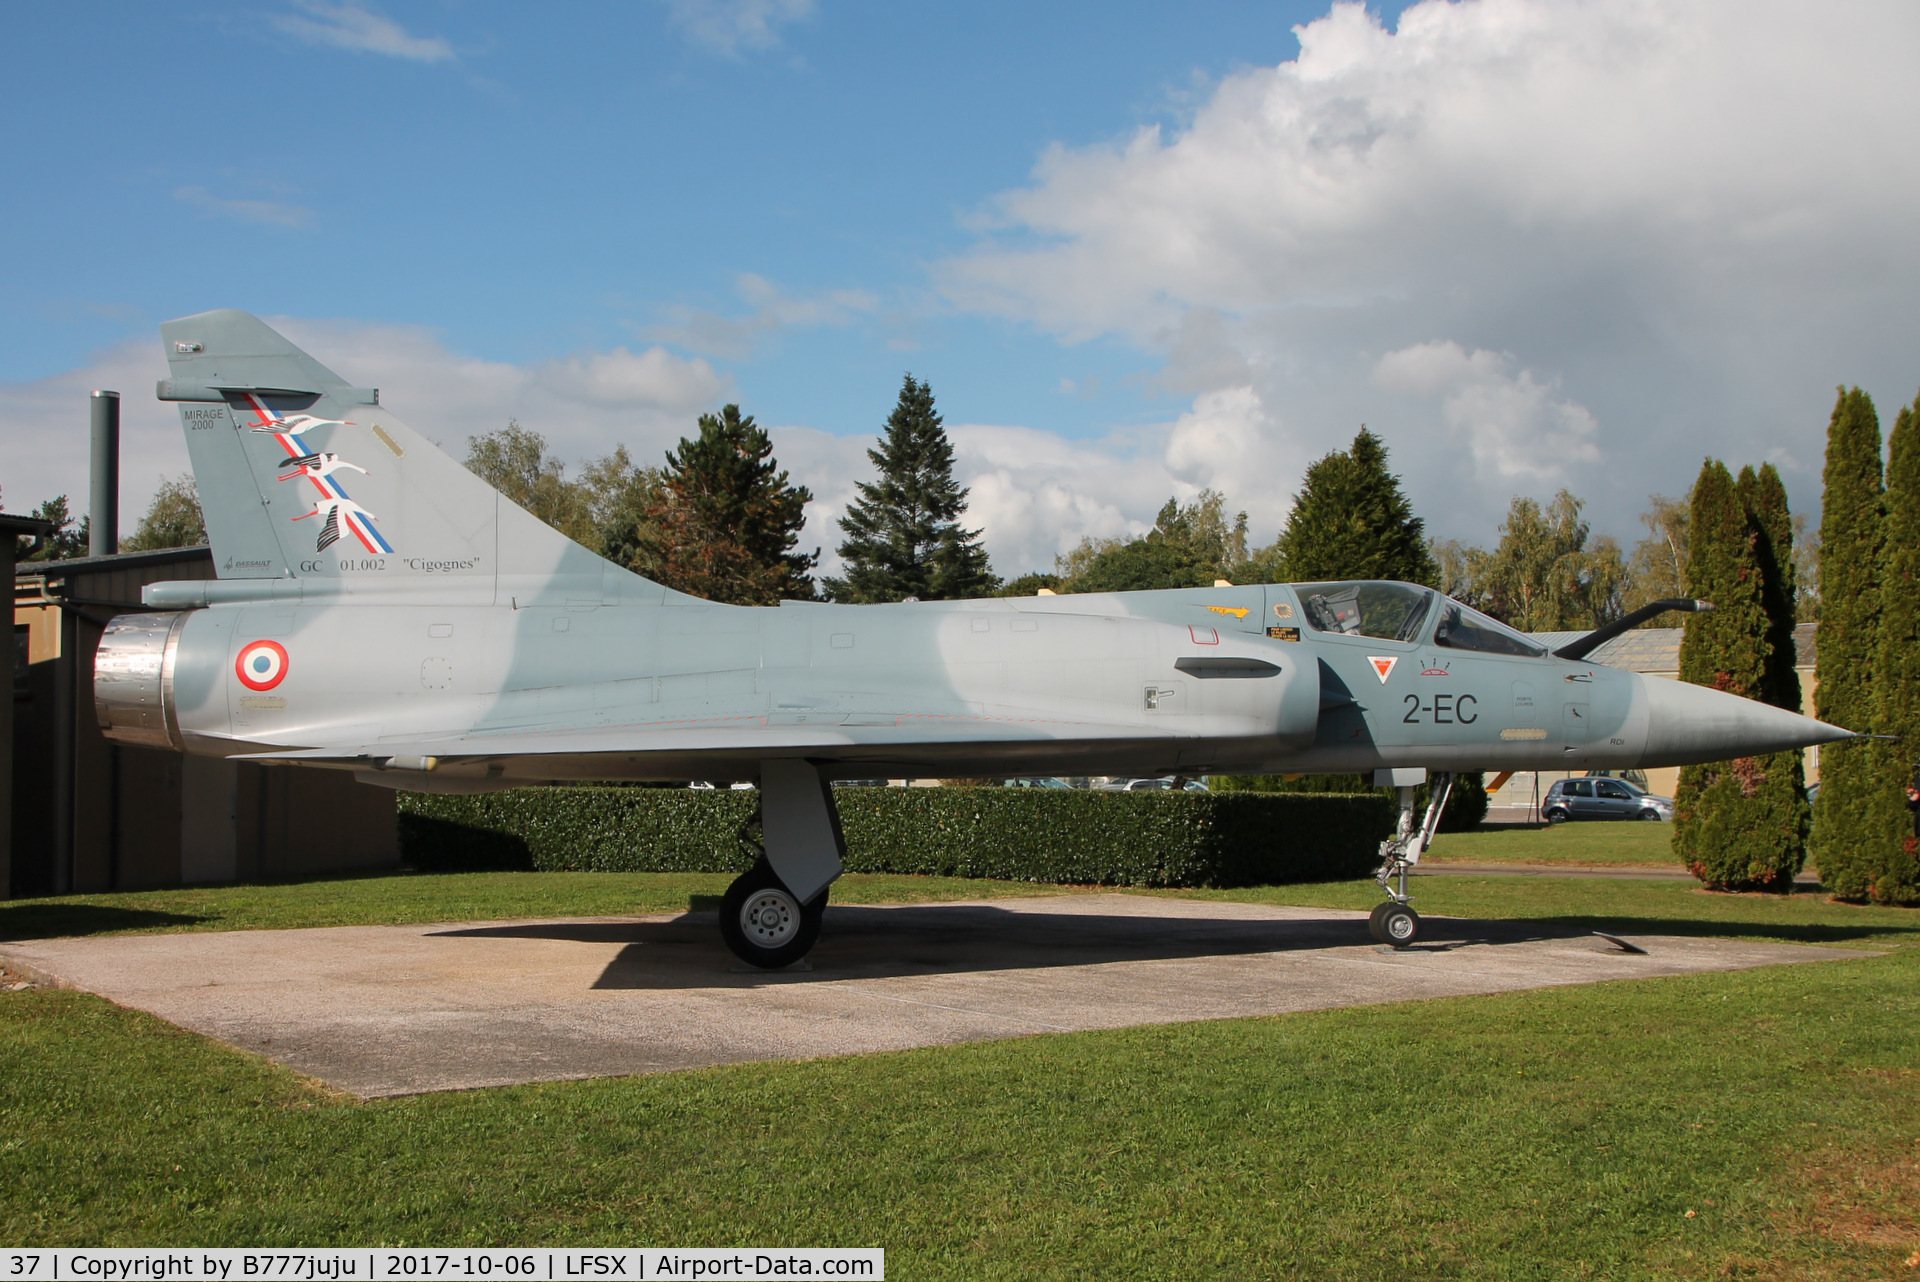 37, Dassault Mirage 2000C C/N 37, preserved at Luxeuil
2-EC for 2nd Escasdre de Chasse